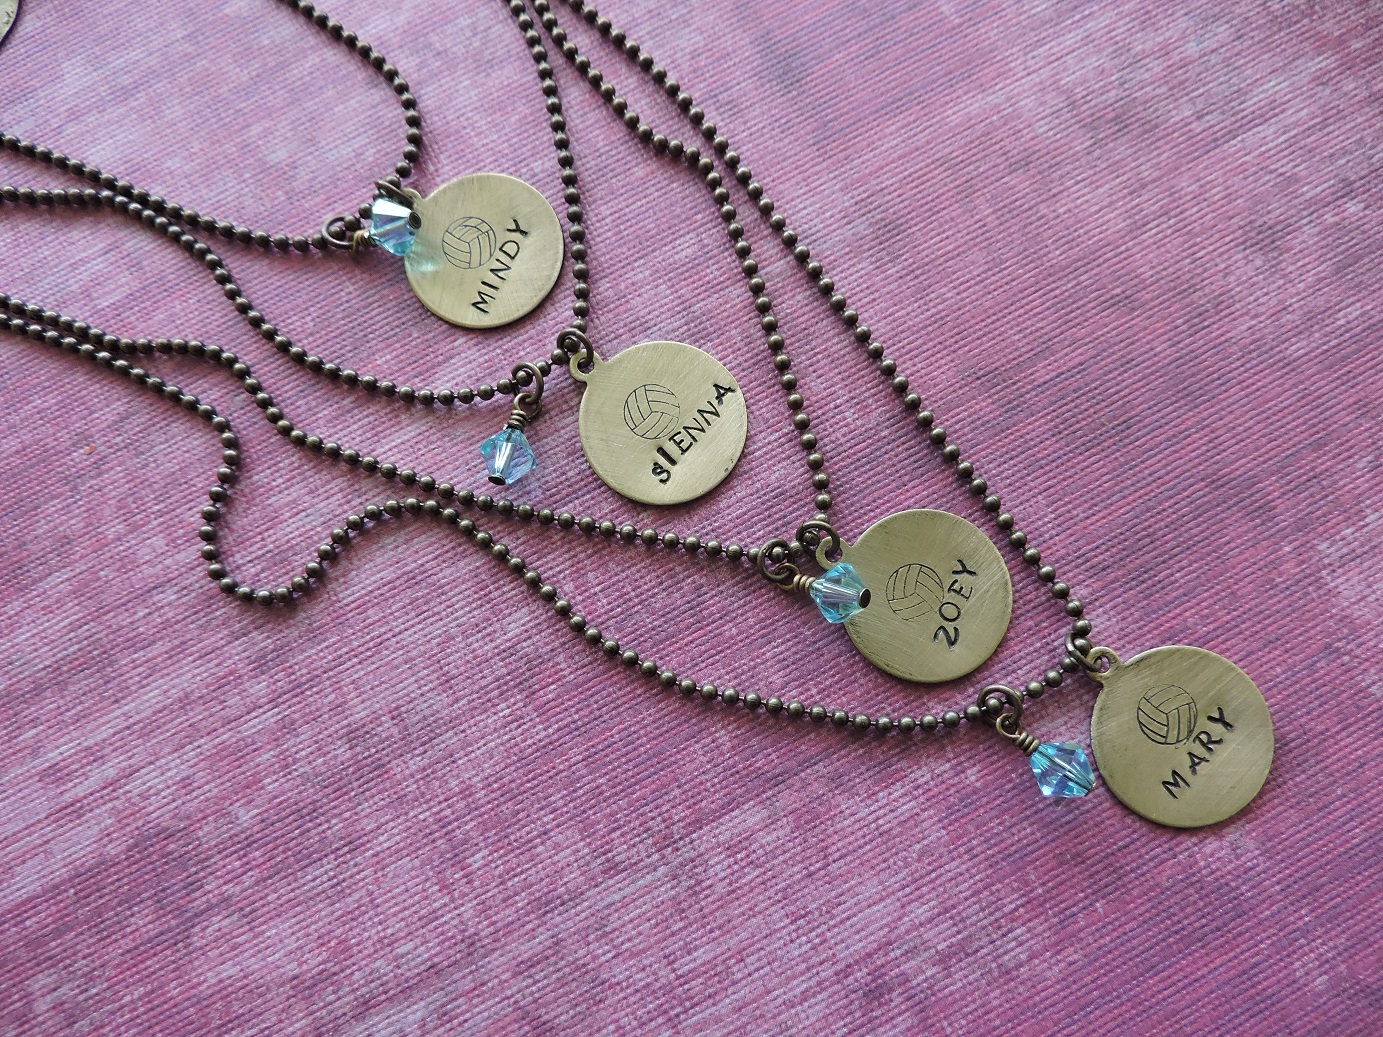 Make Metal Stamped Sports Team Necklaces - Rings and Things